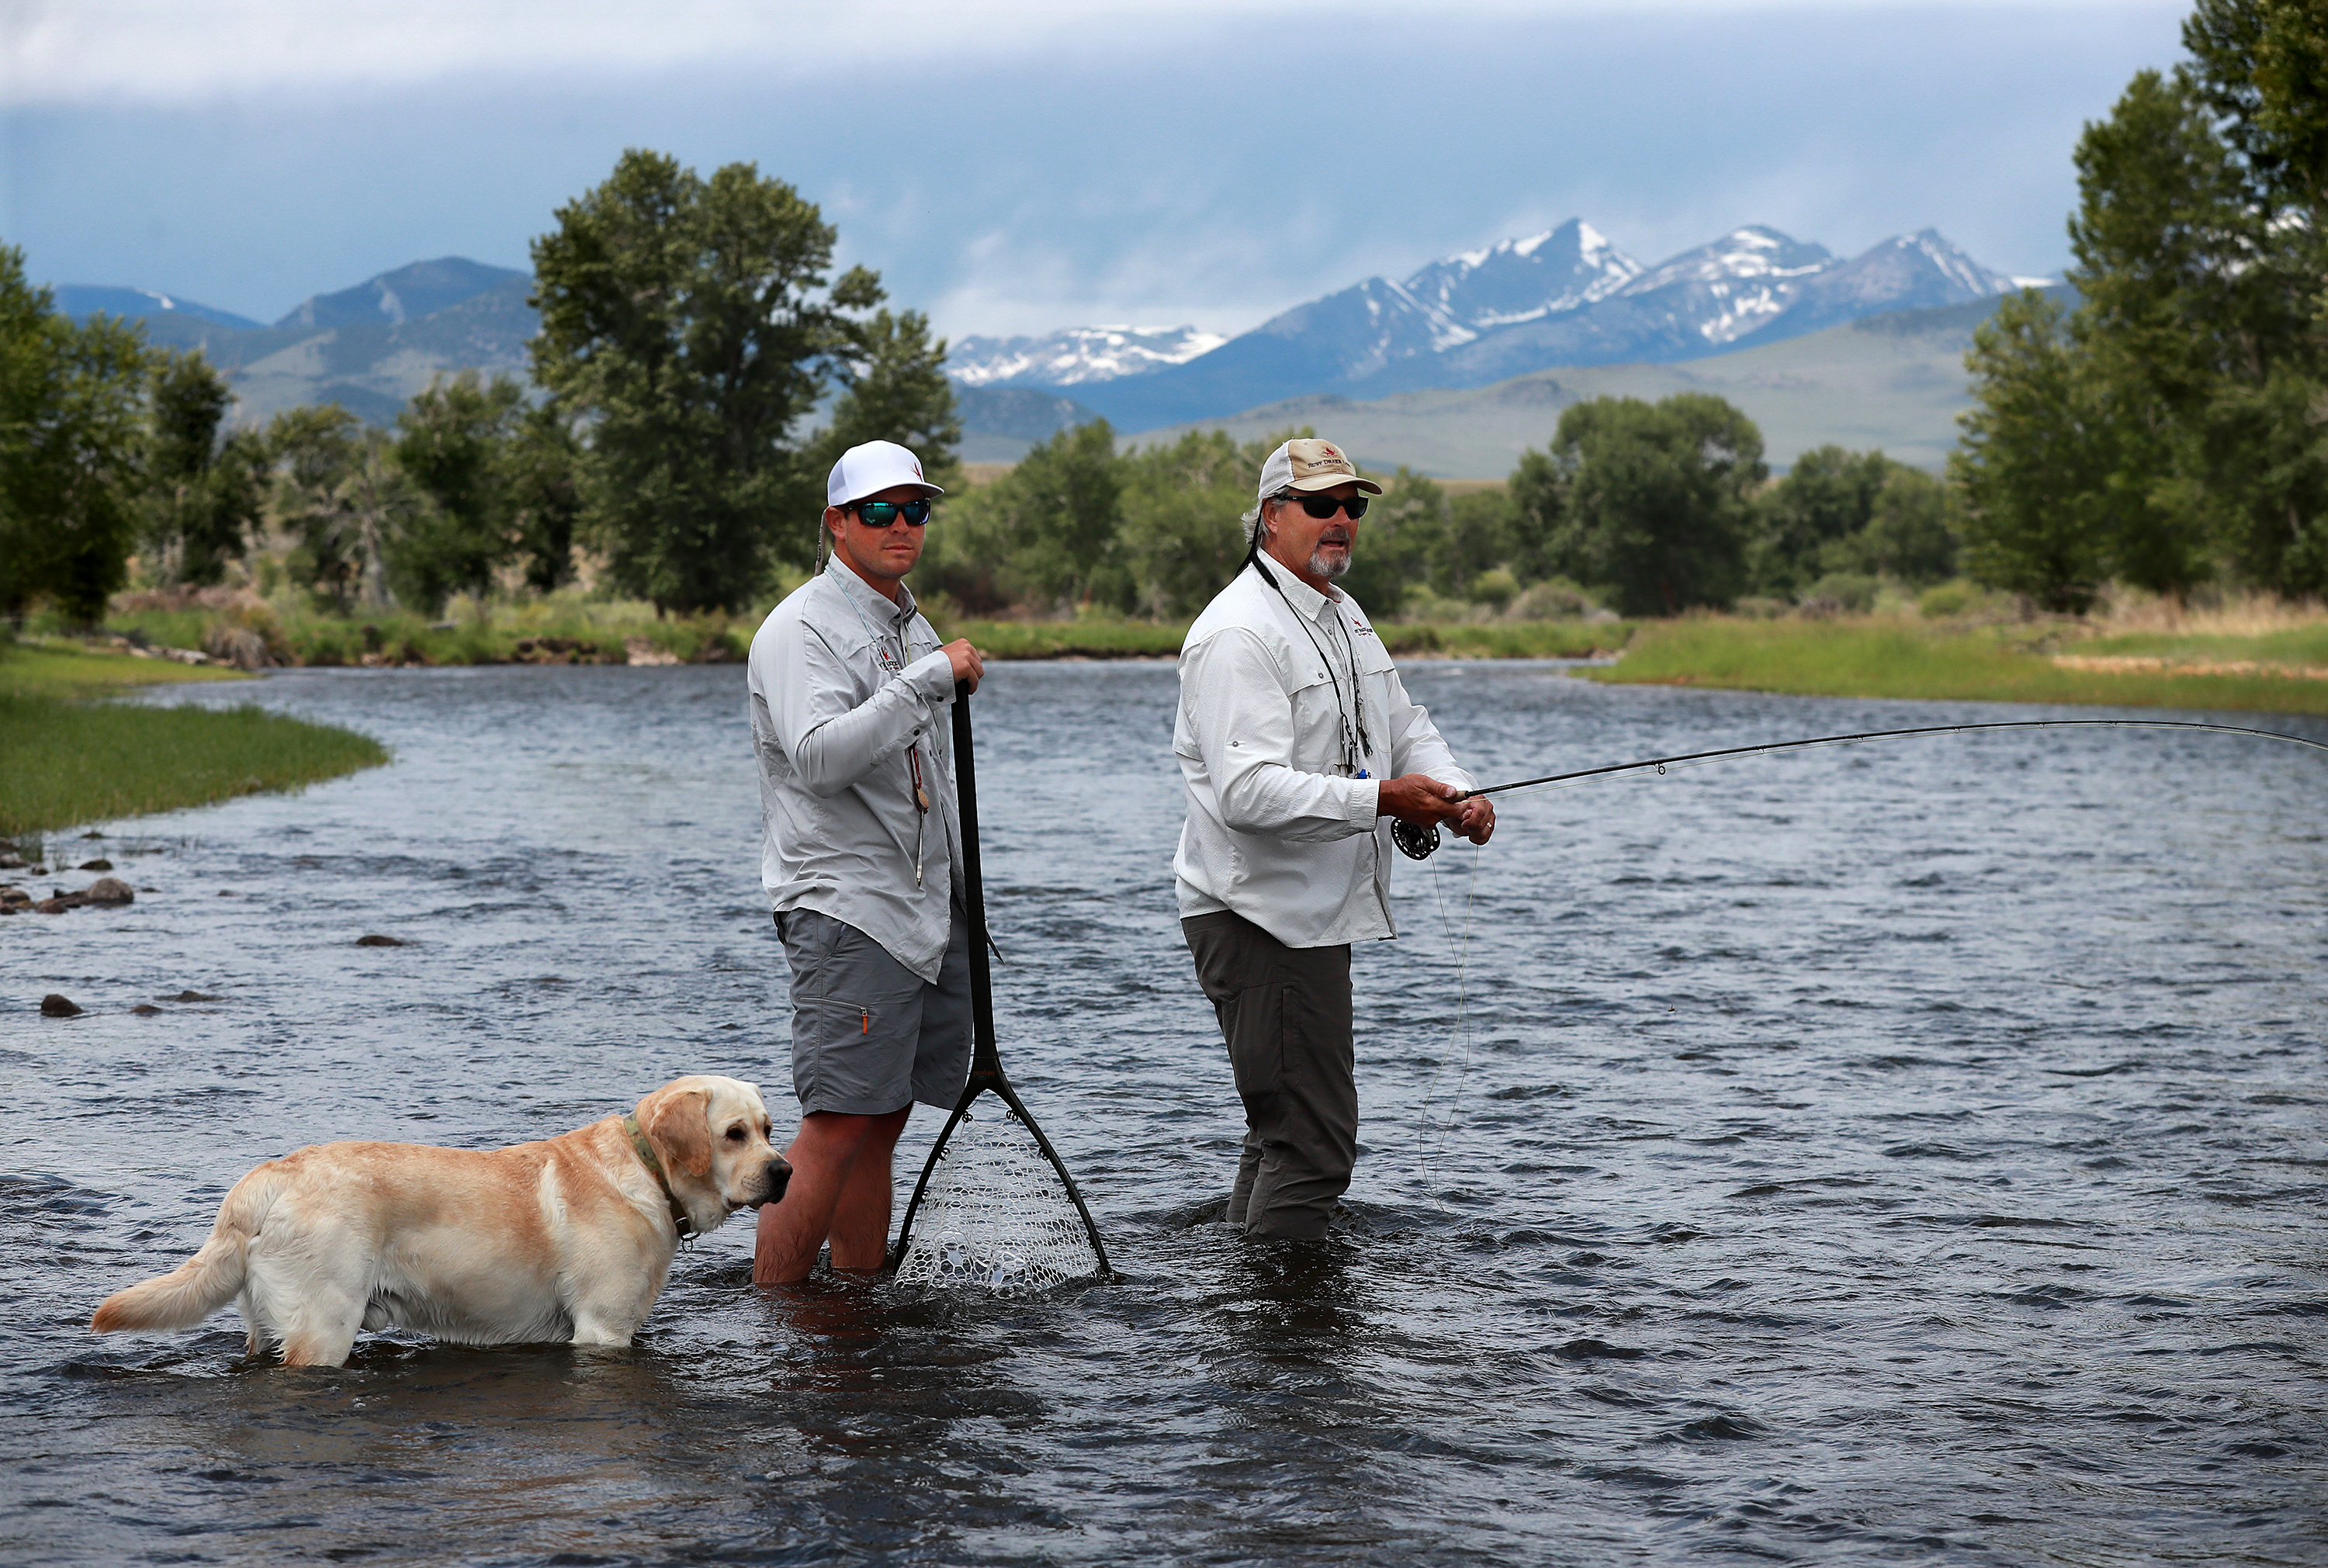 A day spent fly-fishing with an old Falcon is better than most